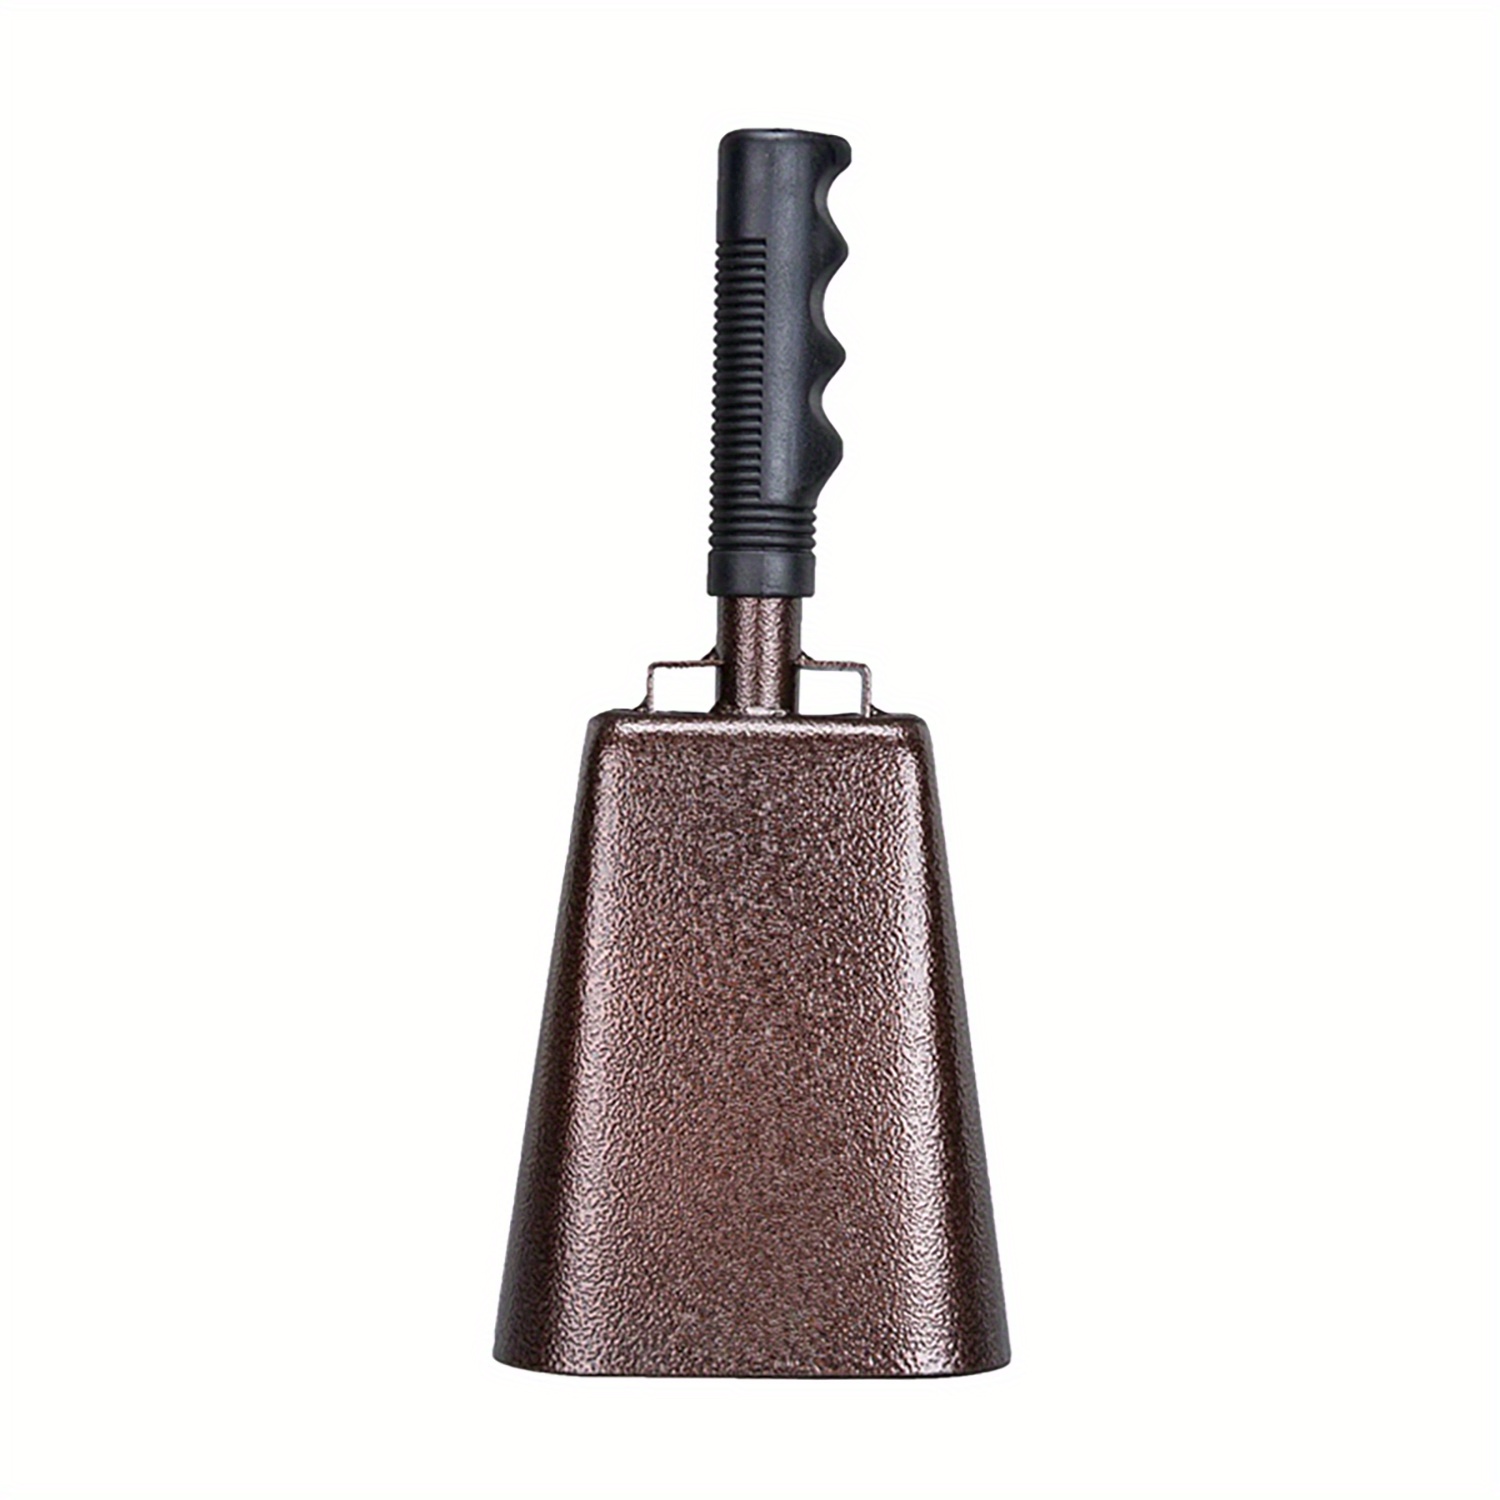 Eastar 10 inch Steel Cow Bell with Handle Cowbells, Noise Makers, Cheering Loud Call Bell for Sporting Events Football Games Christmas Party School